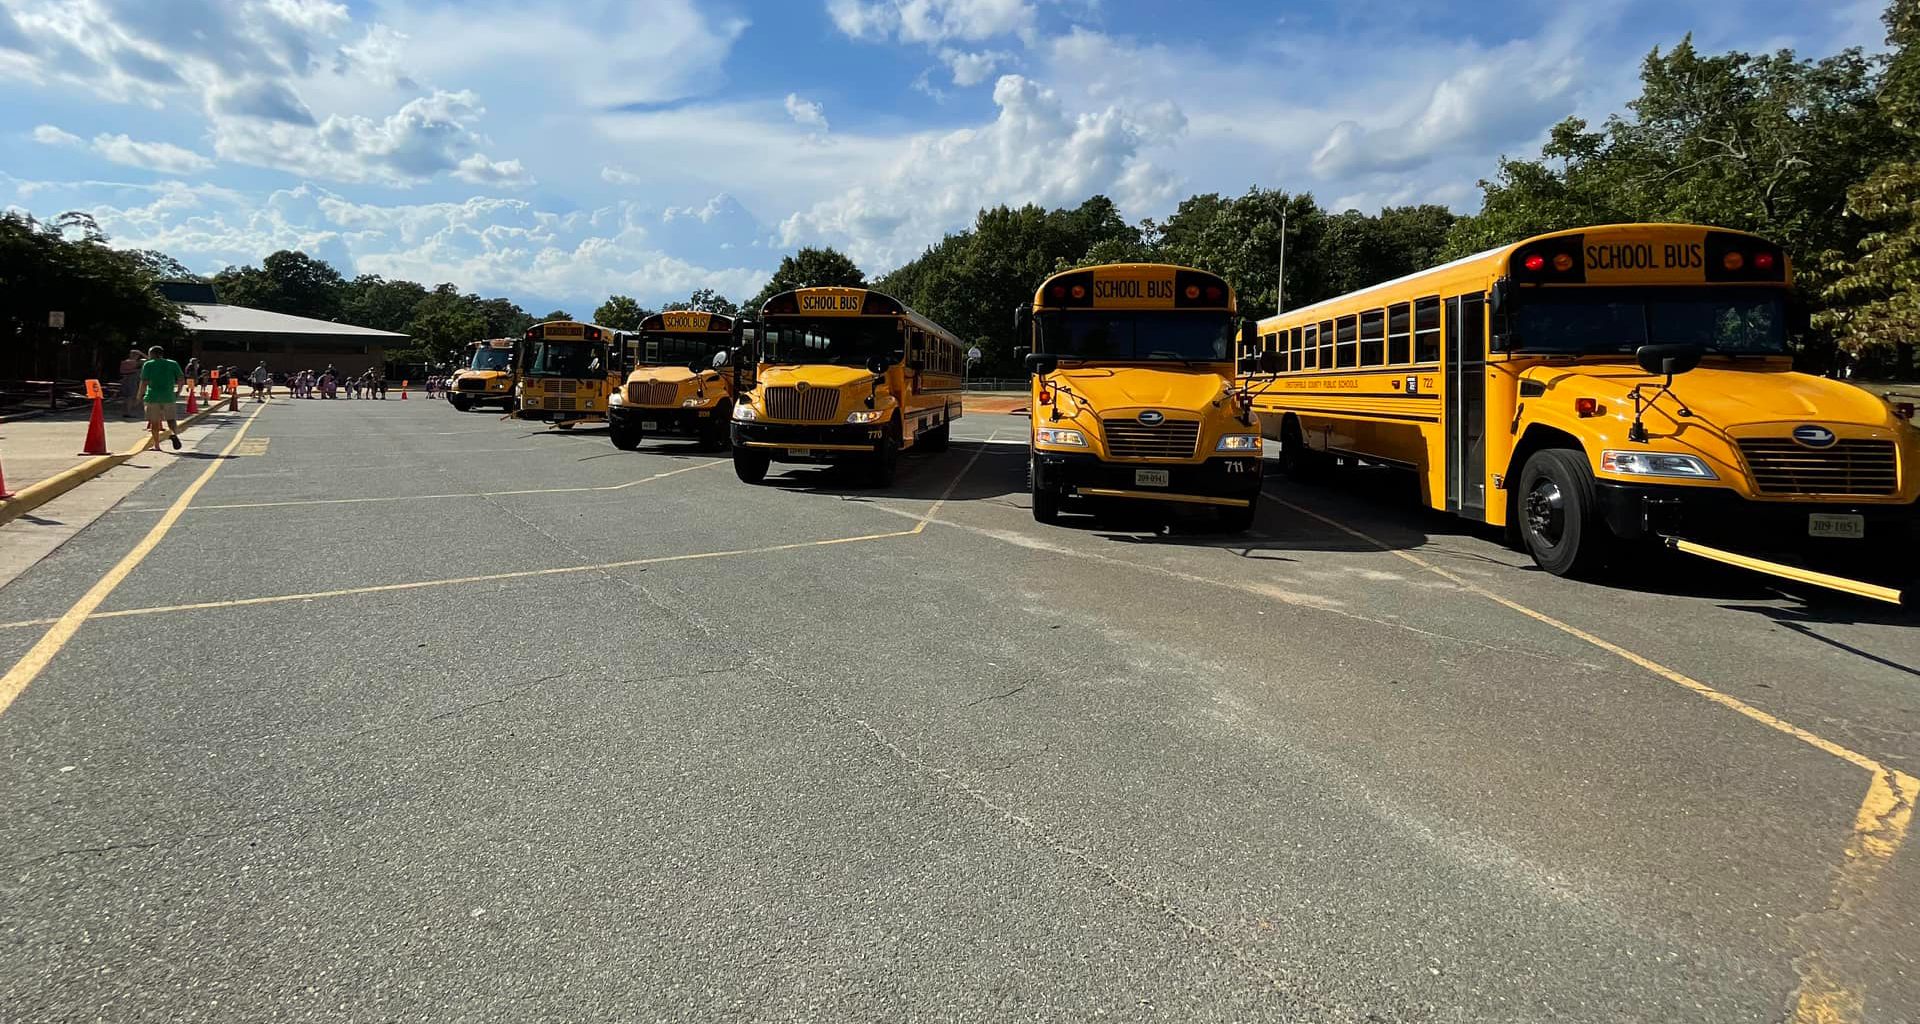 Row  of buses in front of school